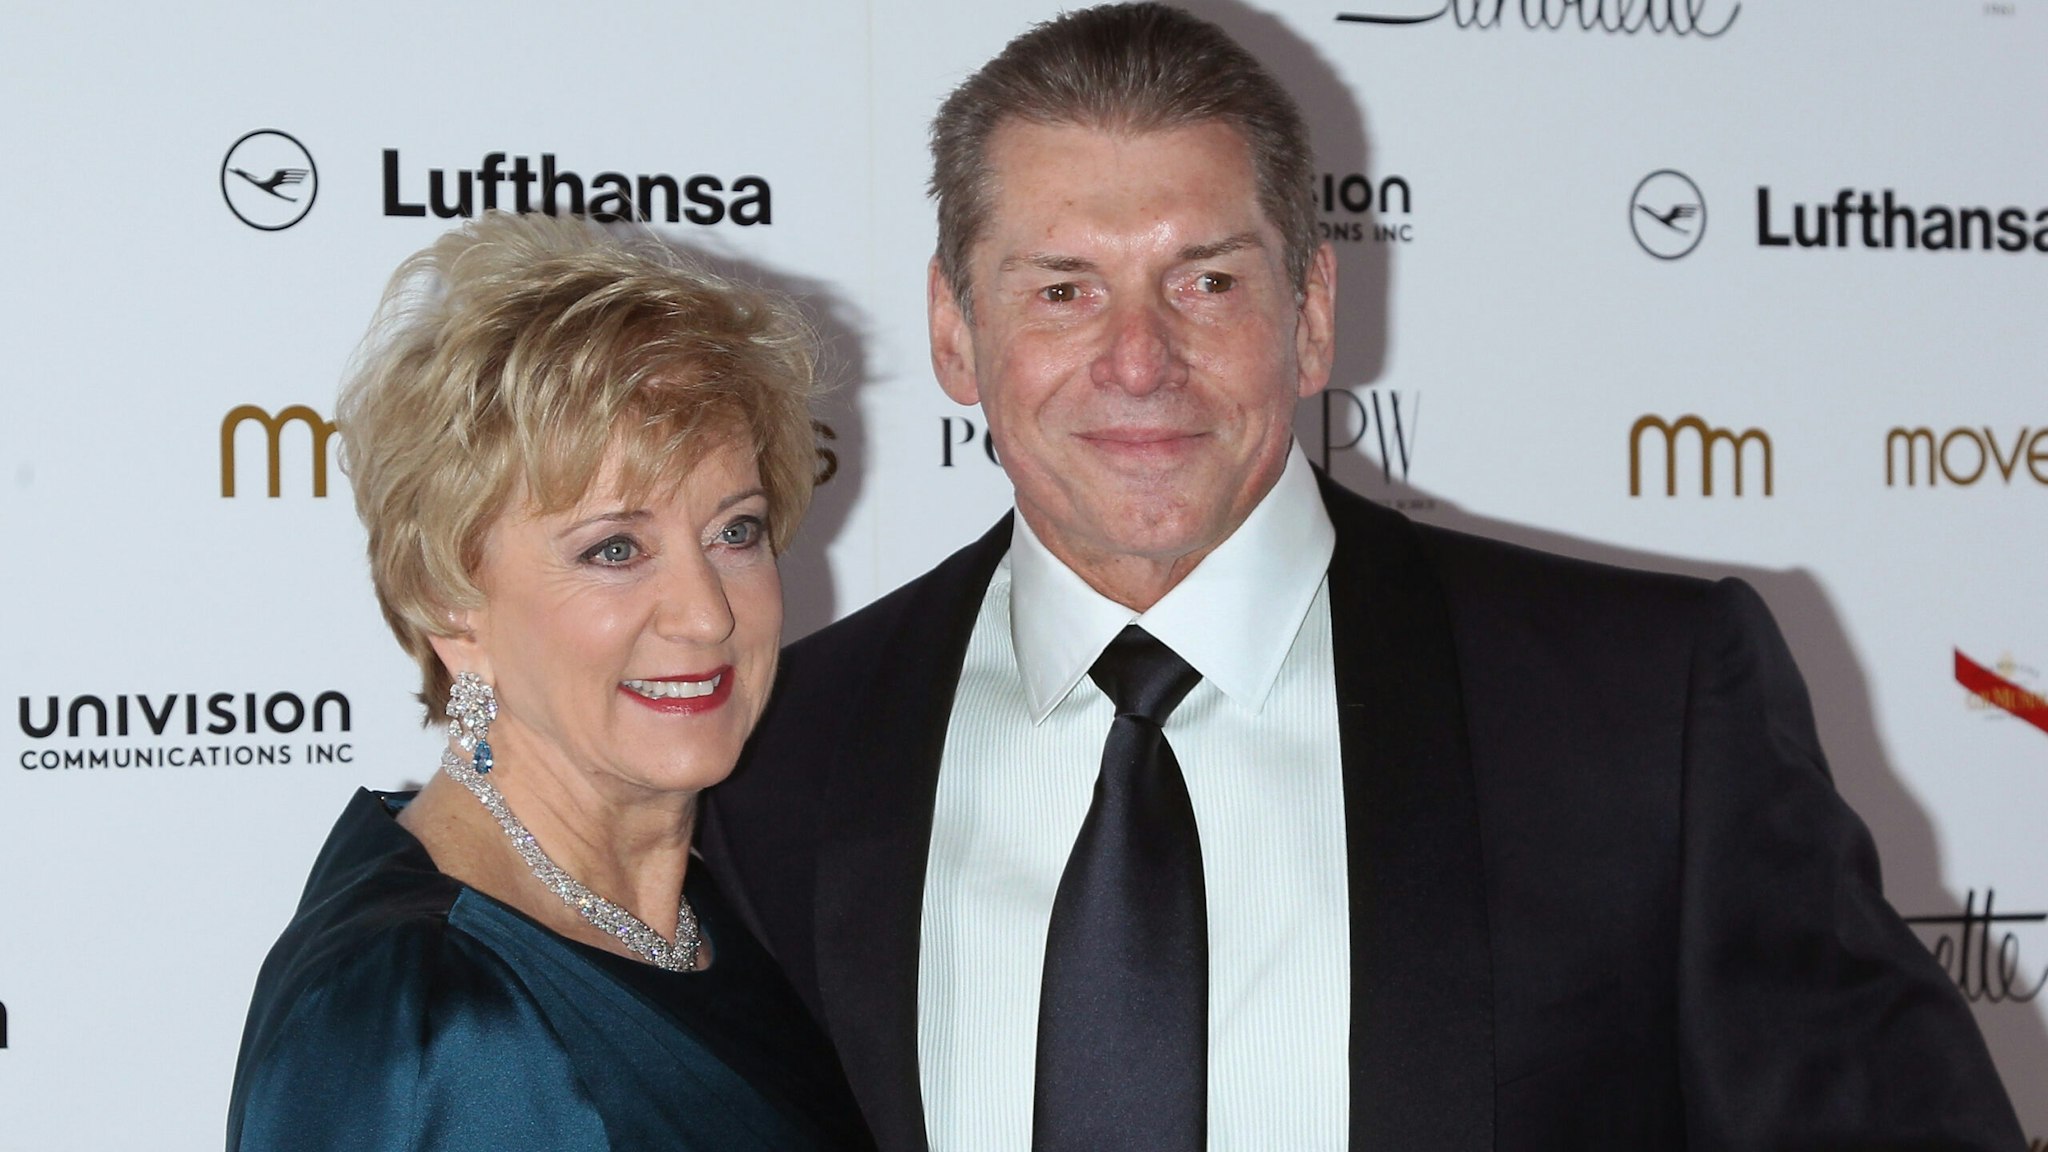 WWE boss Vince McMahon, shown here with wife Linda McMahon, stepped down as CEO amid a messy sex scandal